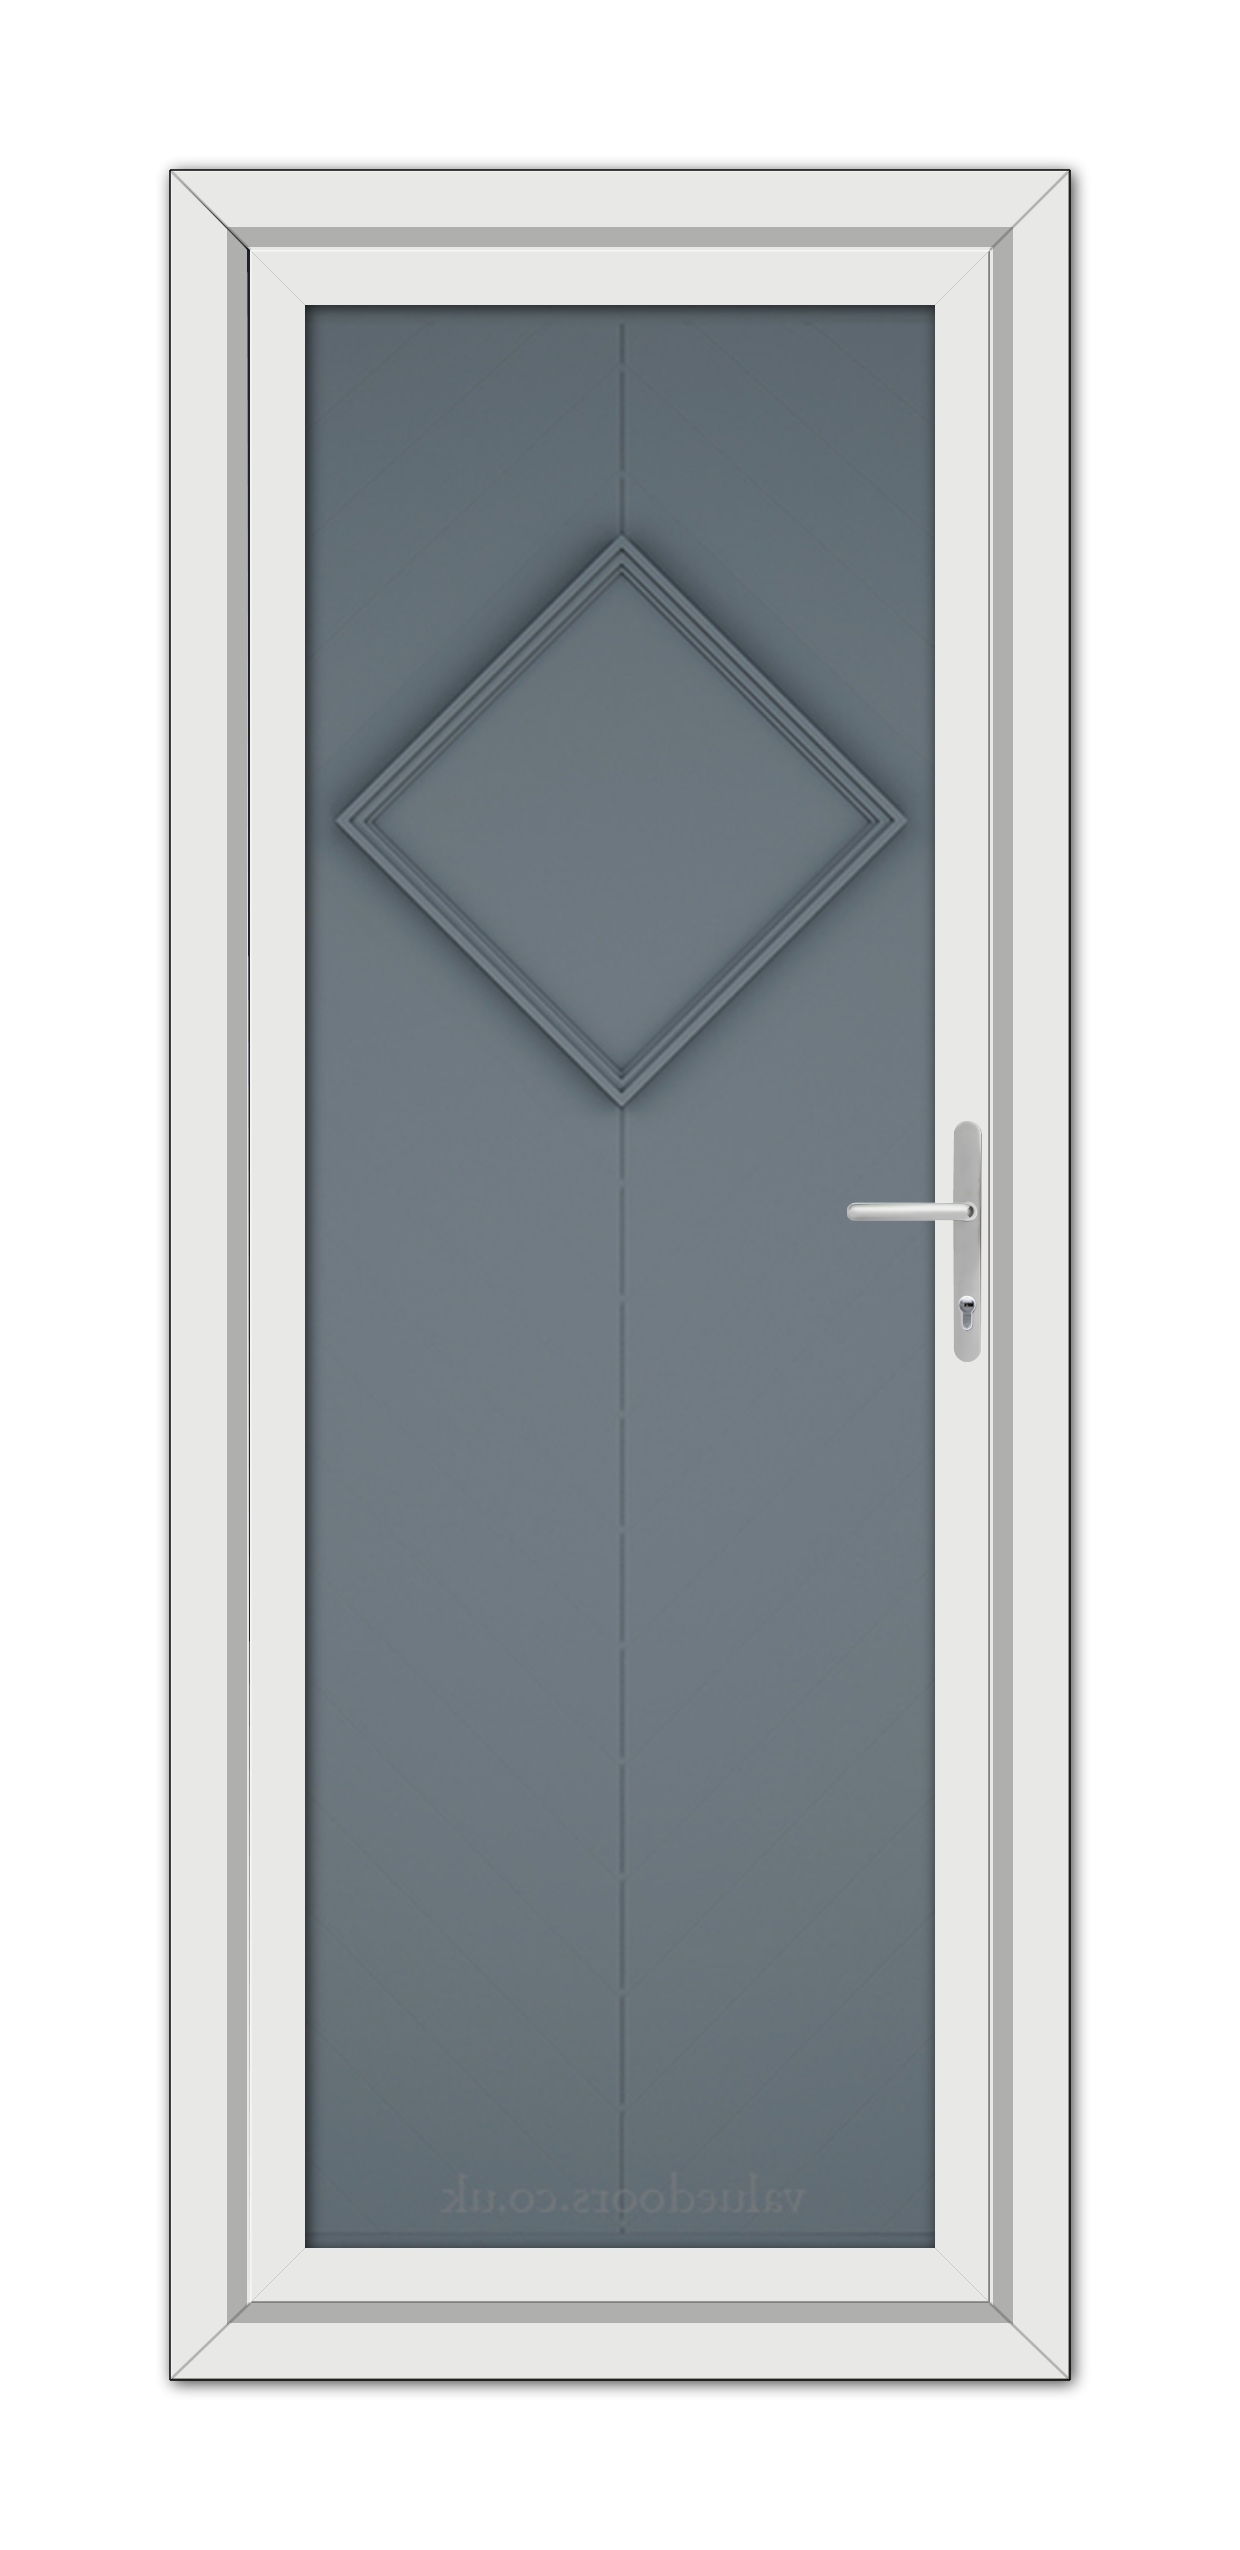 A Slate Grey Hamburg Solid uPVC Door with a square design.